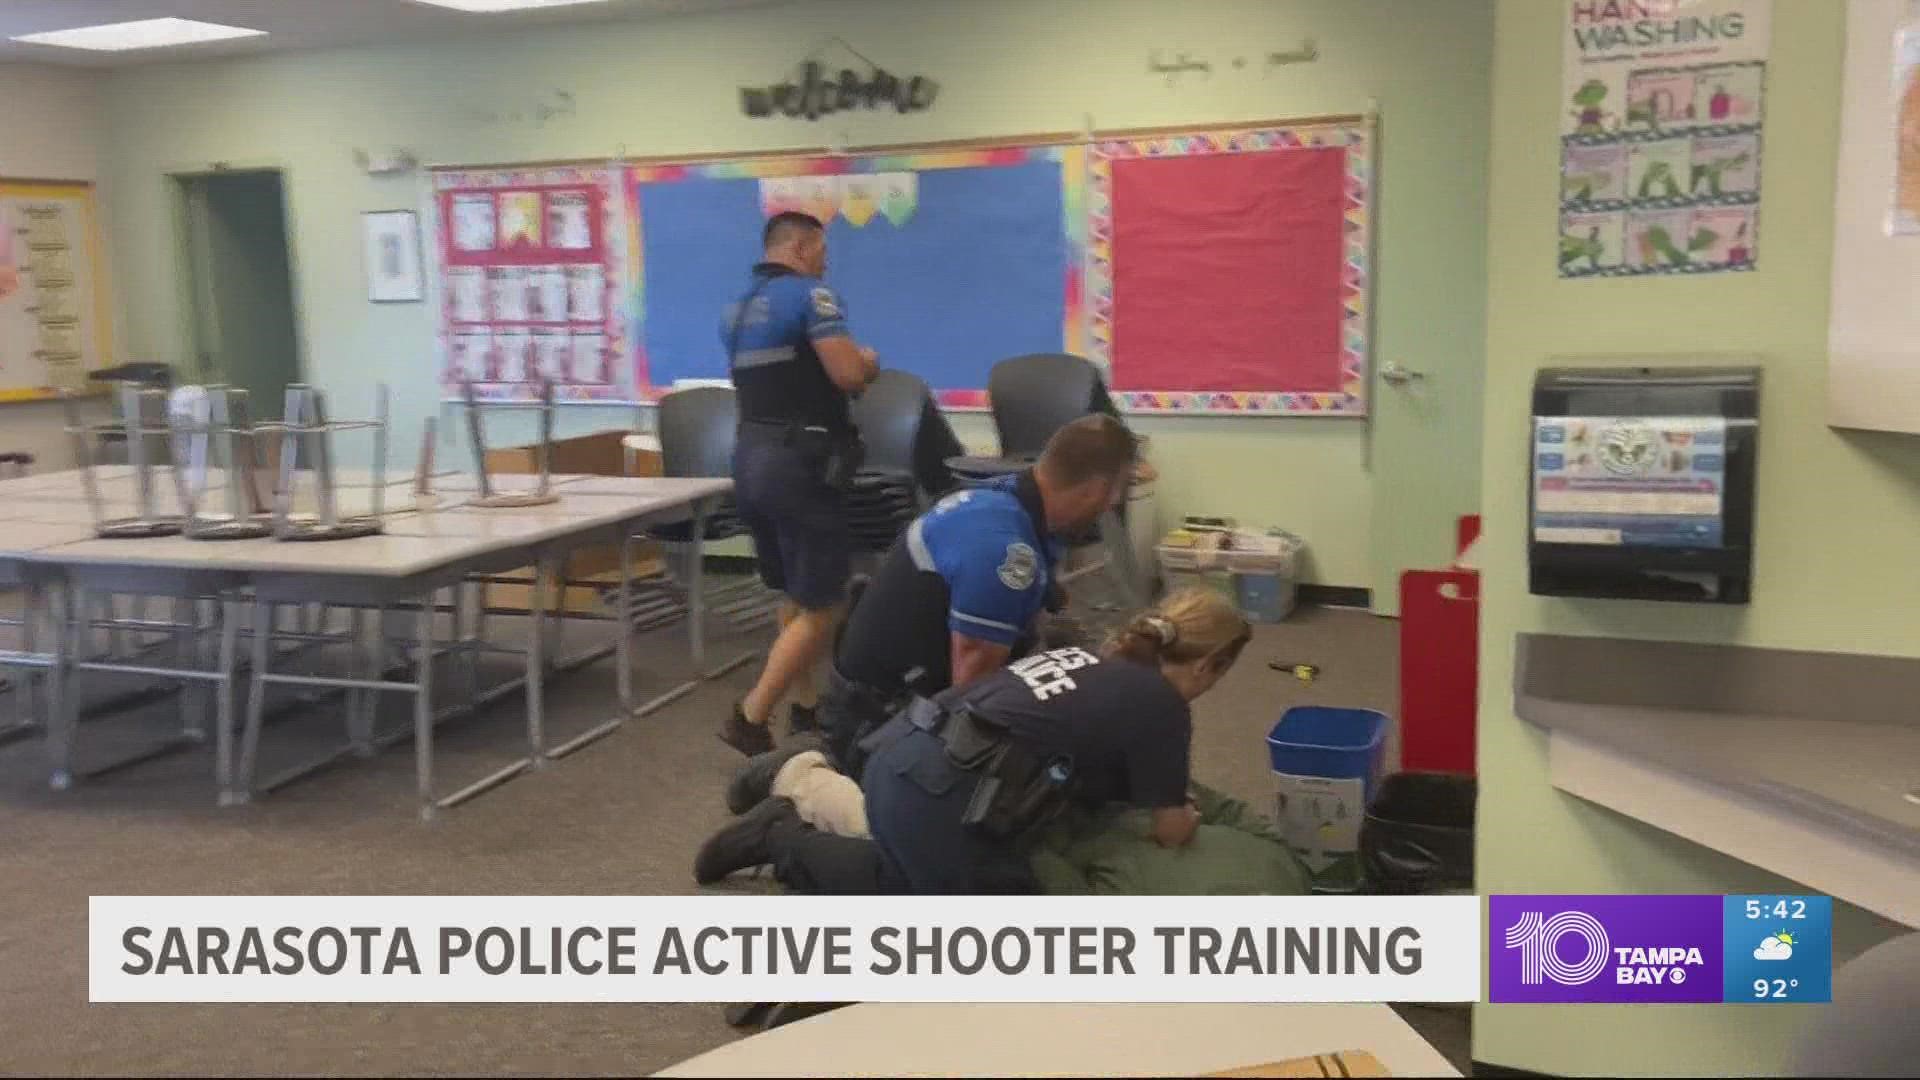 The training is part of the annual SNAP Evaluation of Active Shooter Tactics. The exercise is in the spirit of safety and preparedness for a real-life encounter.